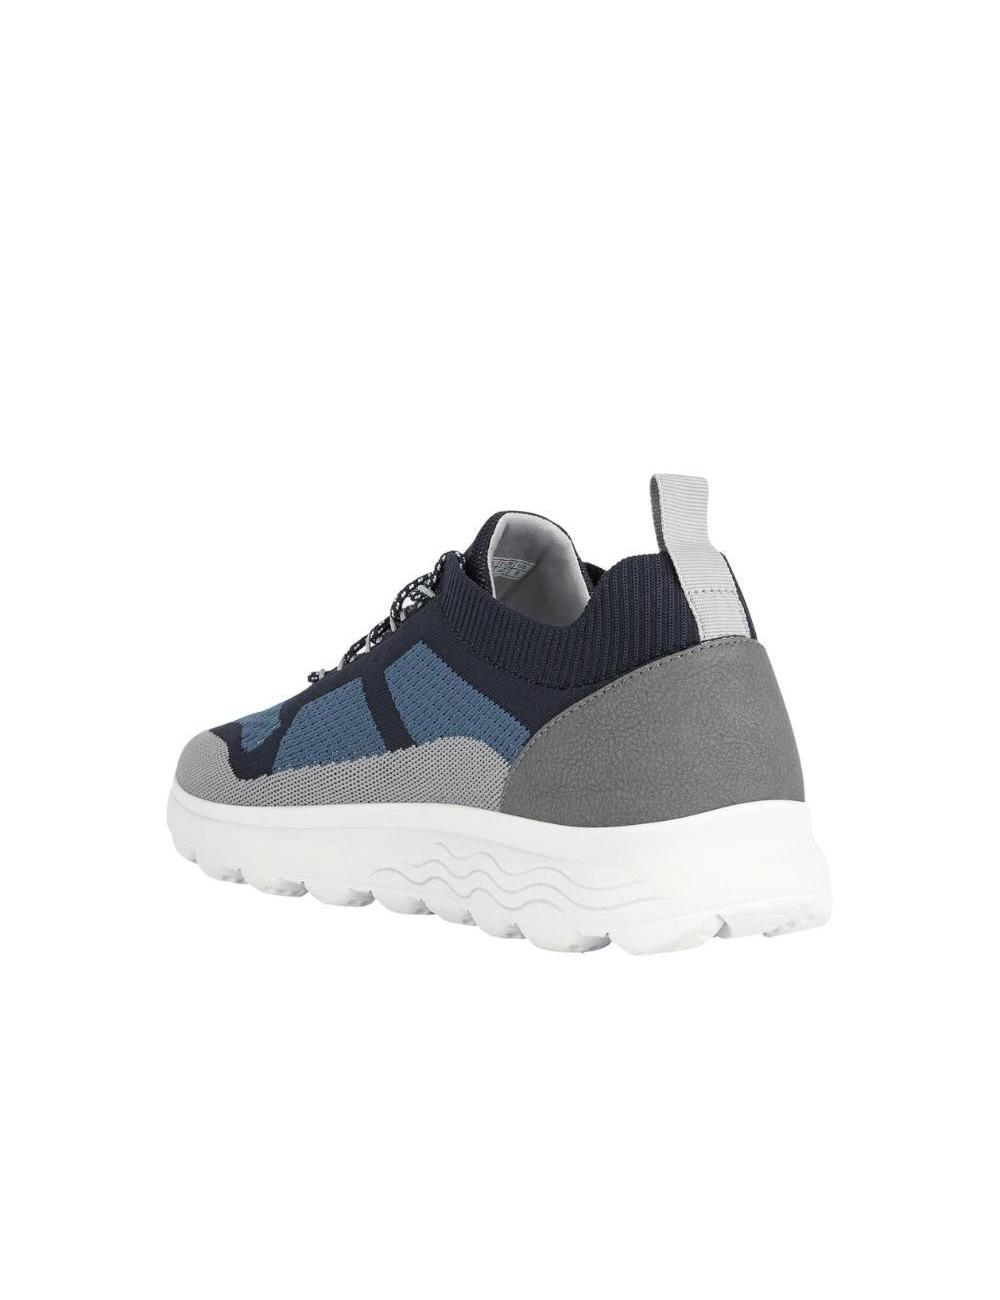 GEOX SPHERICA A-KNITTED TEXT ZAPATILLA DEPORTIVA HOMBRE